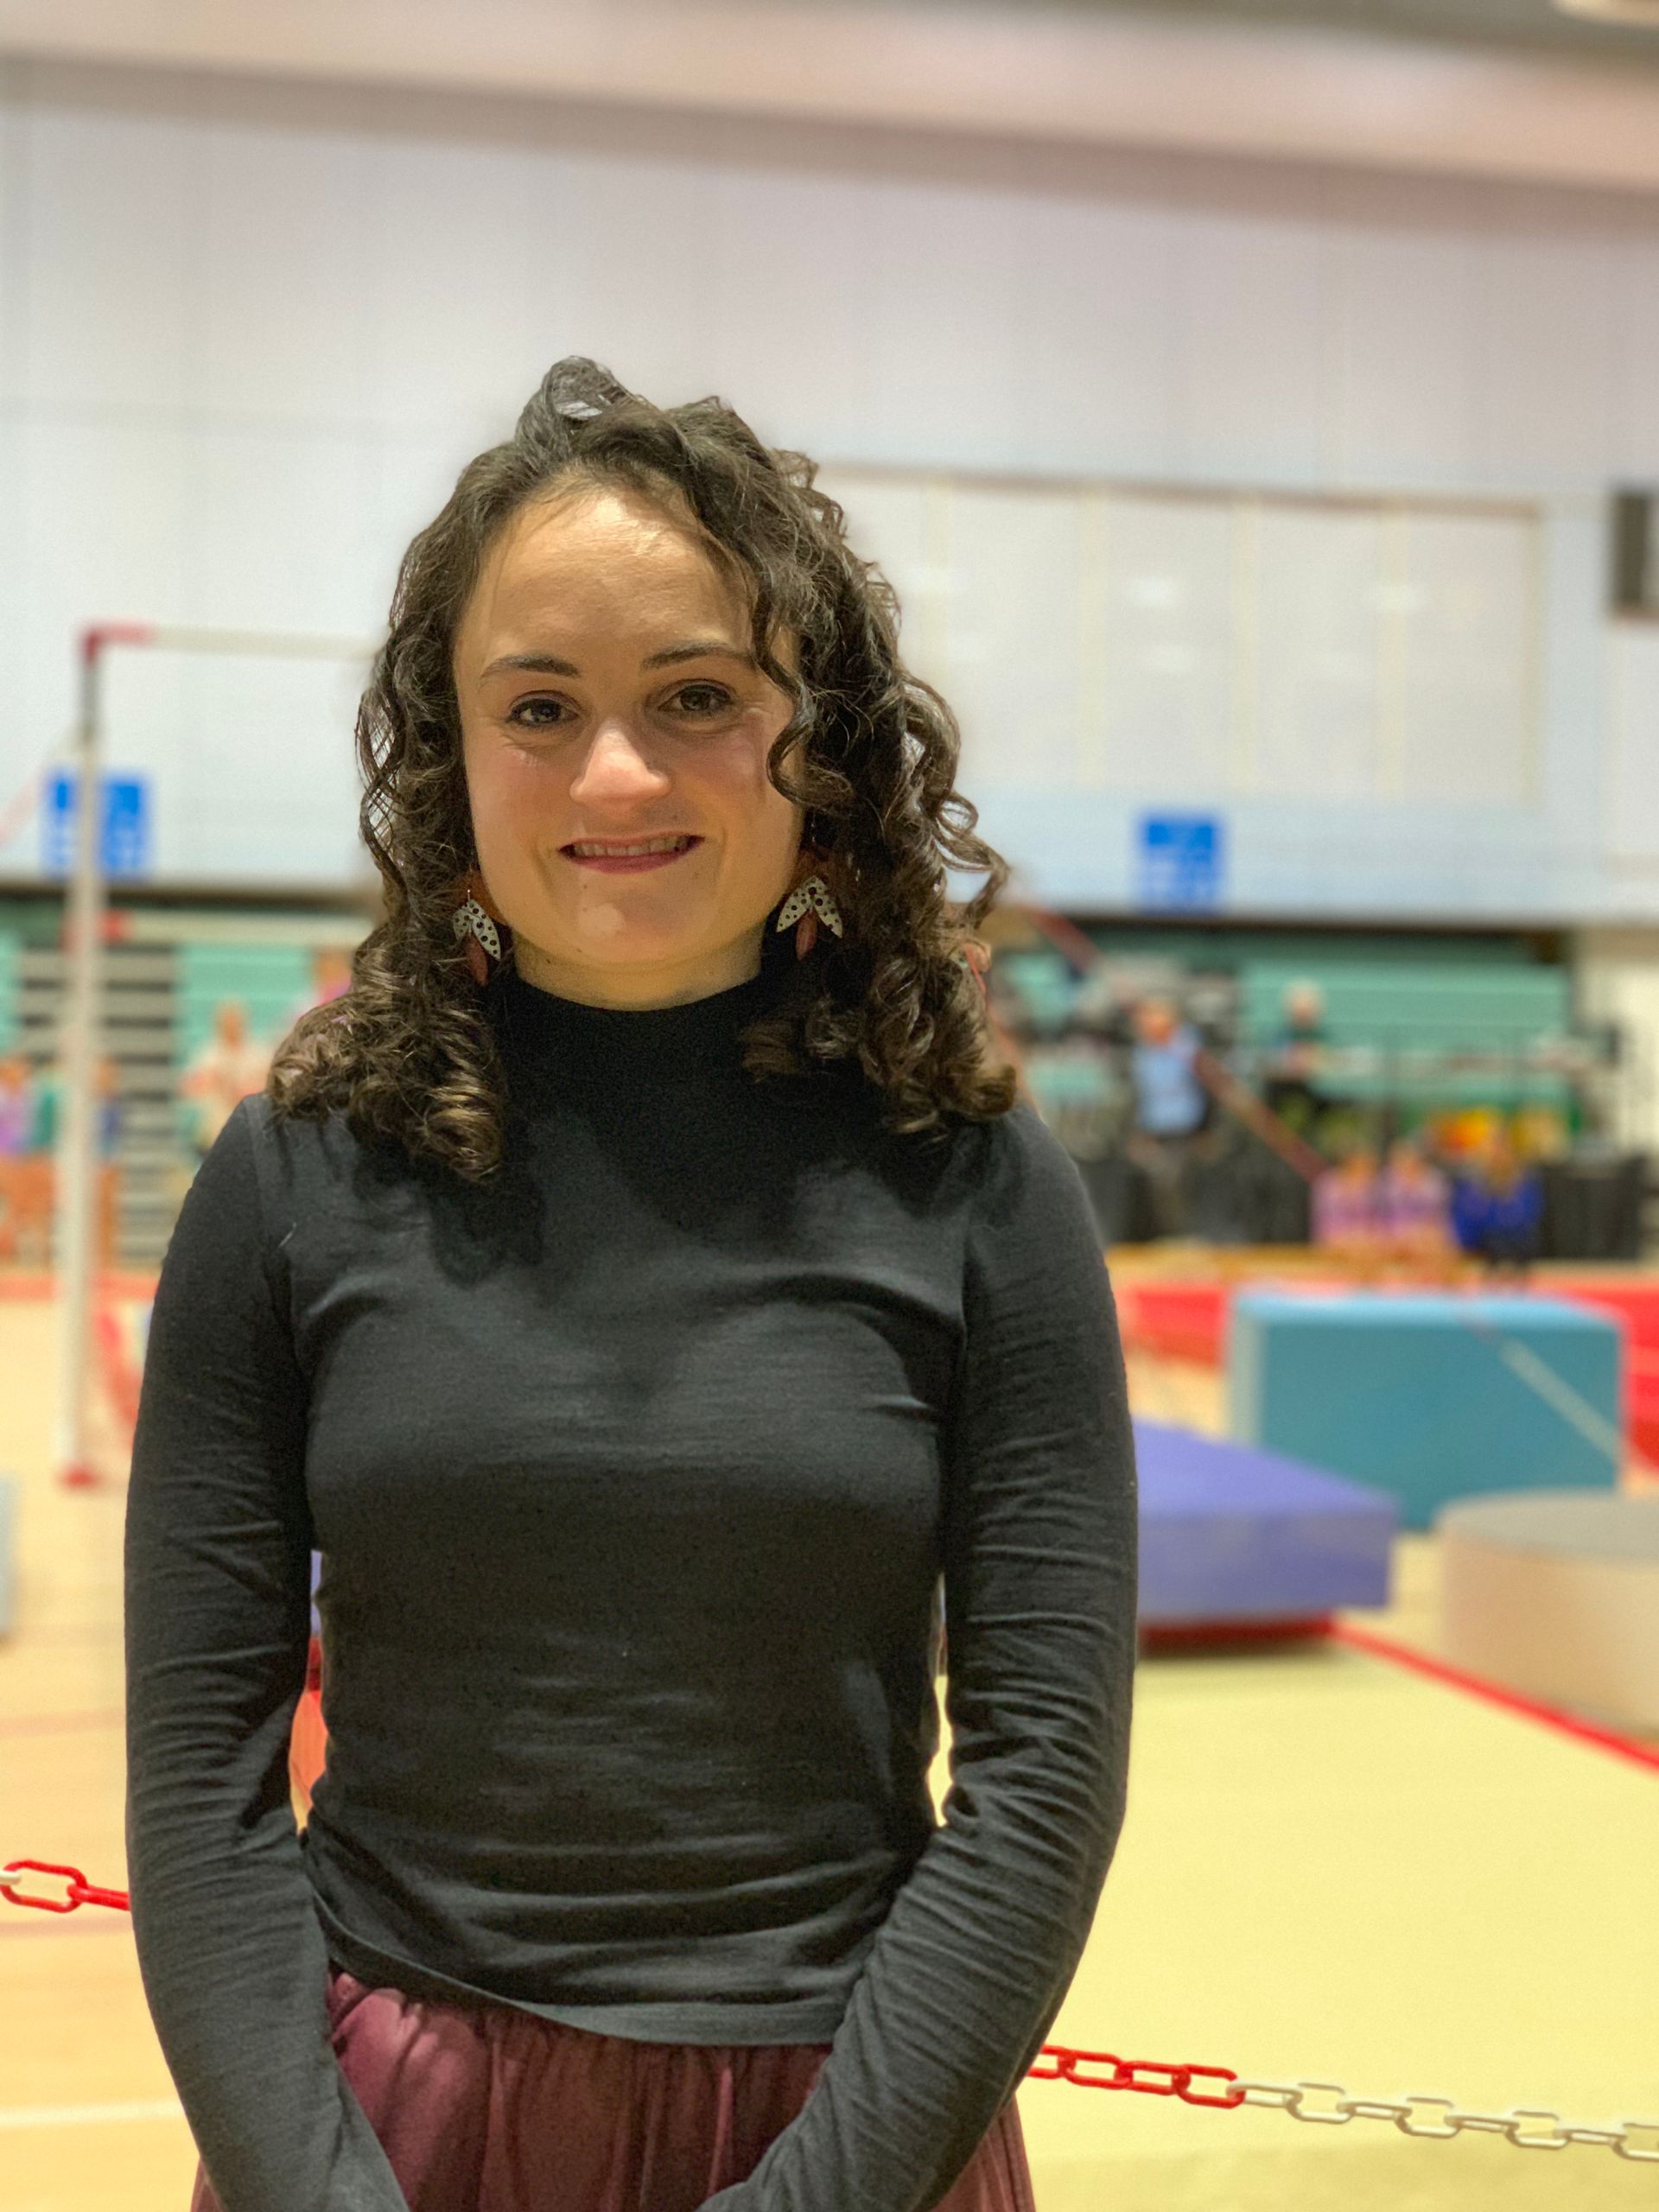 Lauren Lethbridge in a black long top with red trousers and long brown curly hair with gymnastic equipment in the background.